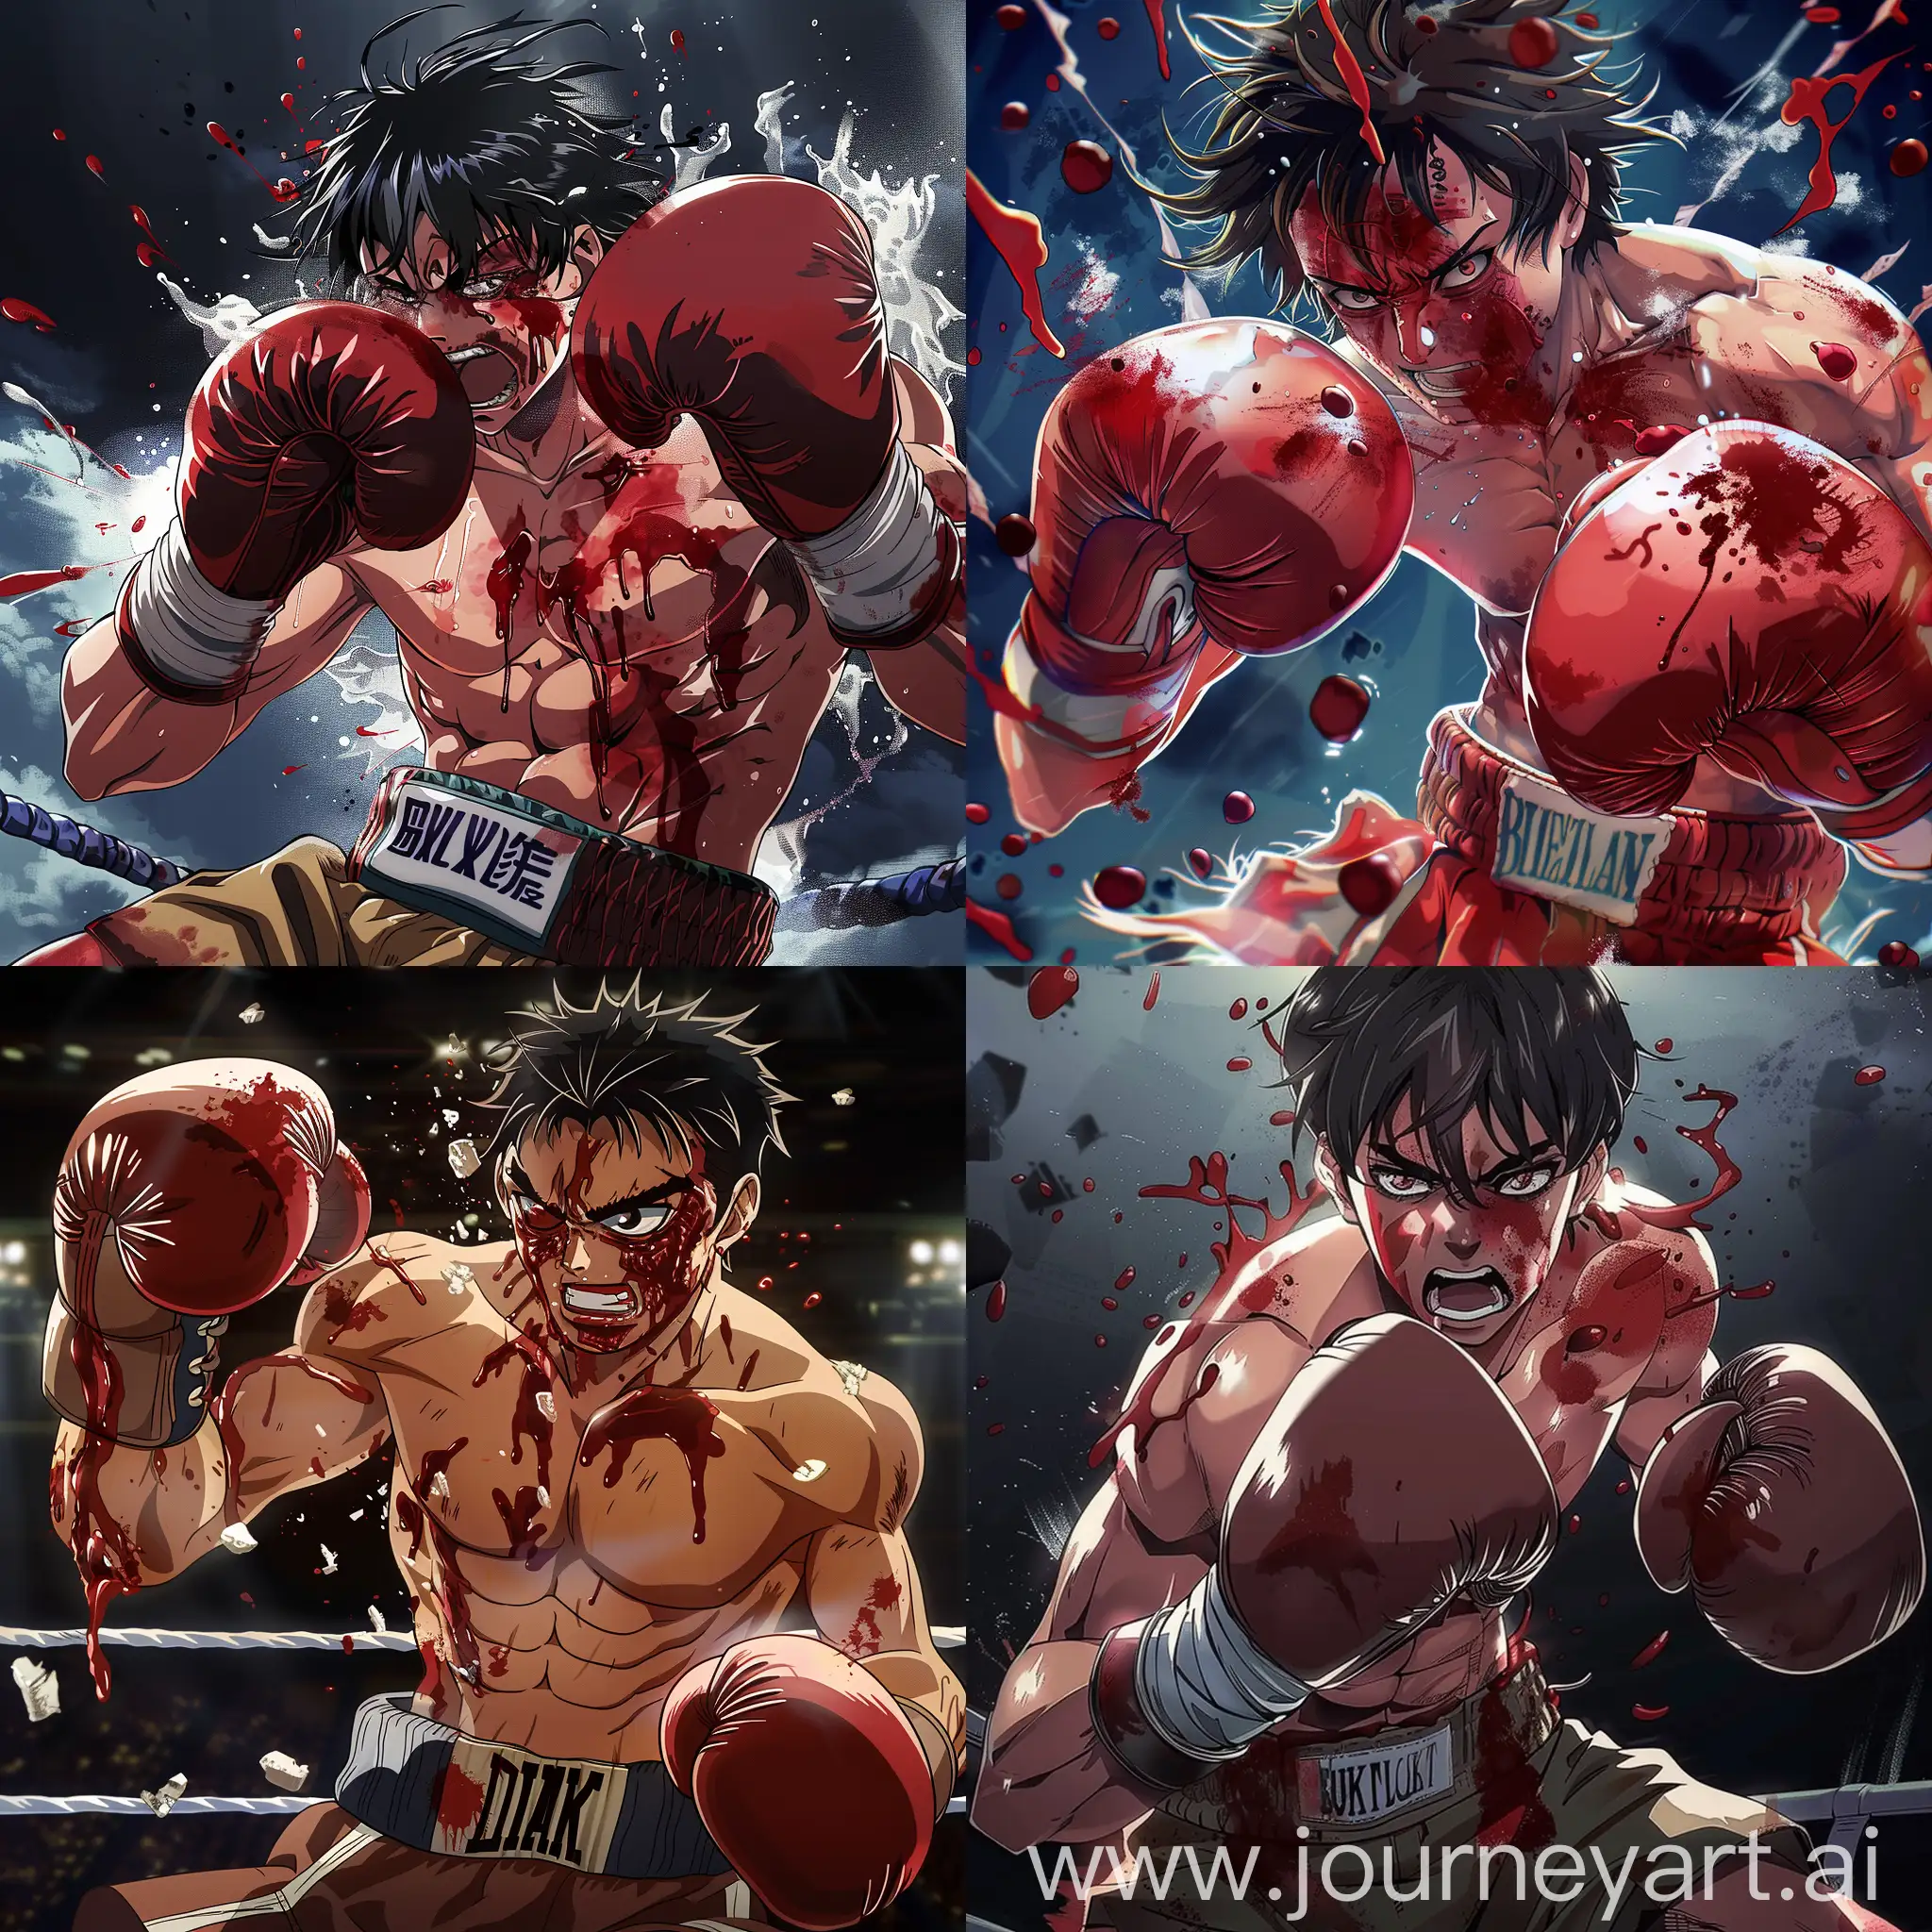 Intense-Anime-Boxing-Character-Powerful-Strike-with-Bloodied-Gloves